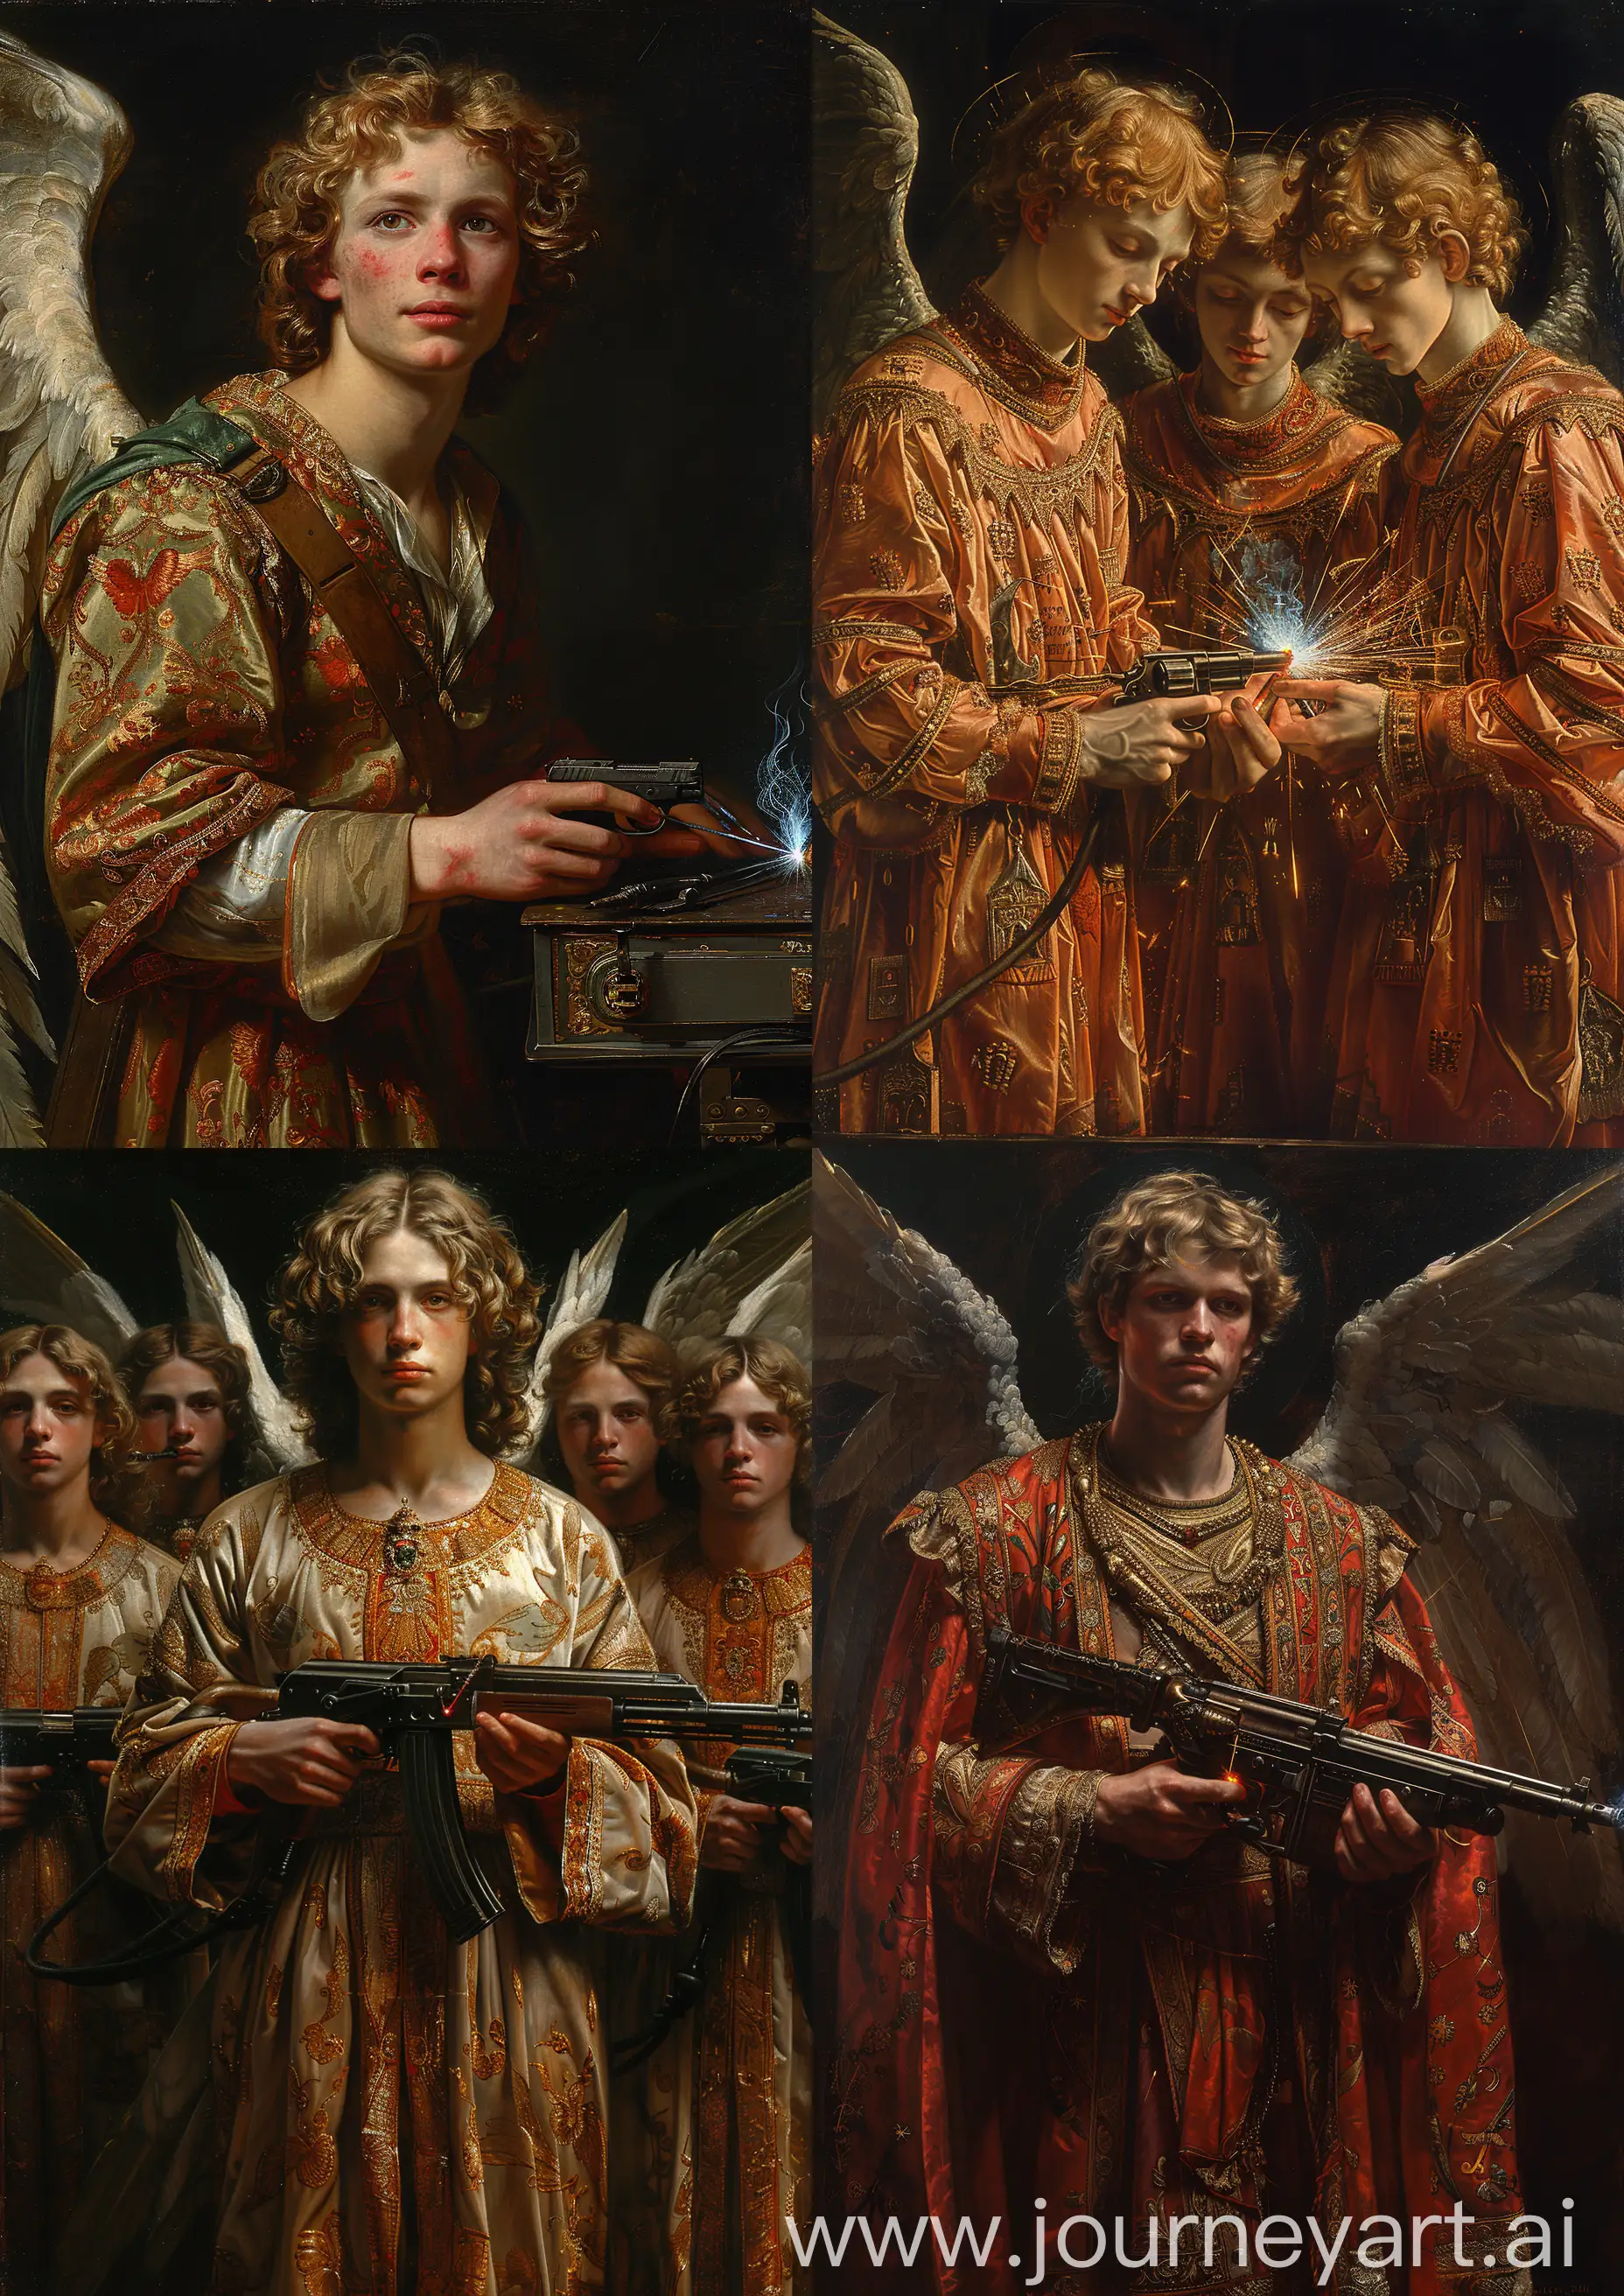 Heavenly-Warriors-in-Ornate-Silk-Robes-Divine-Aesthetics-with-Angelic-Armament